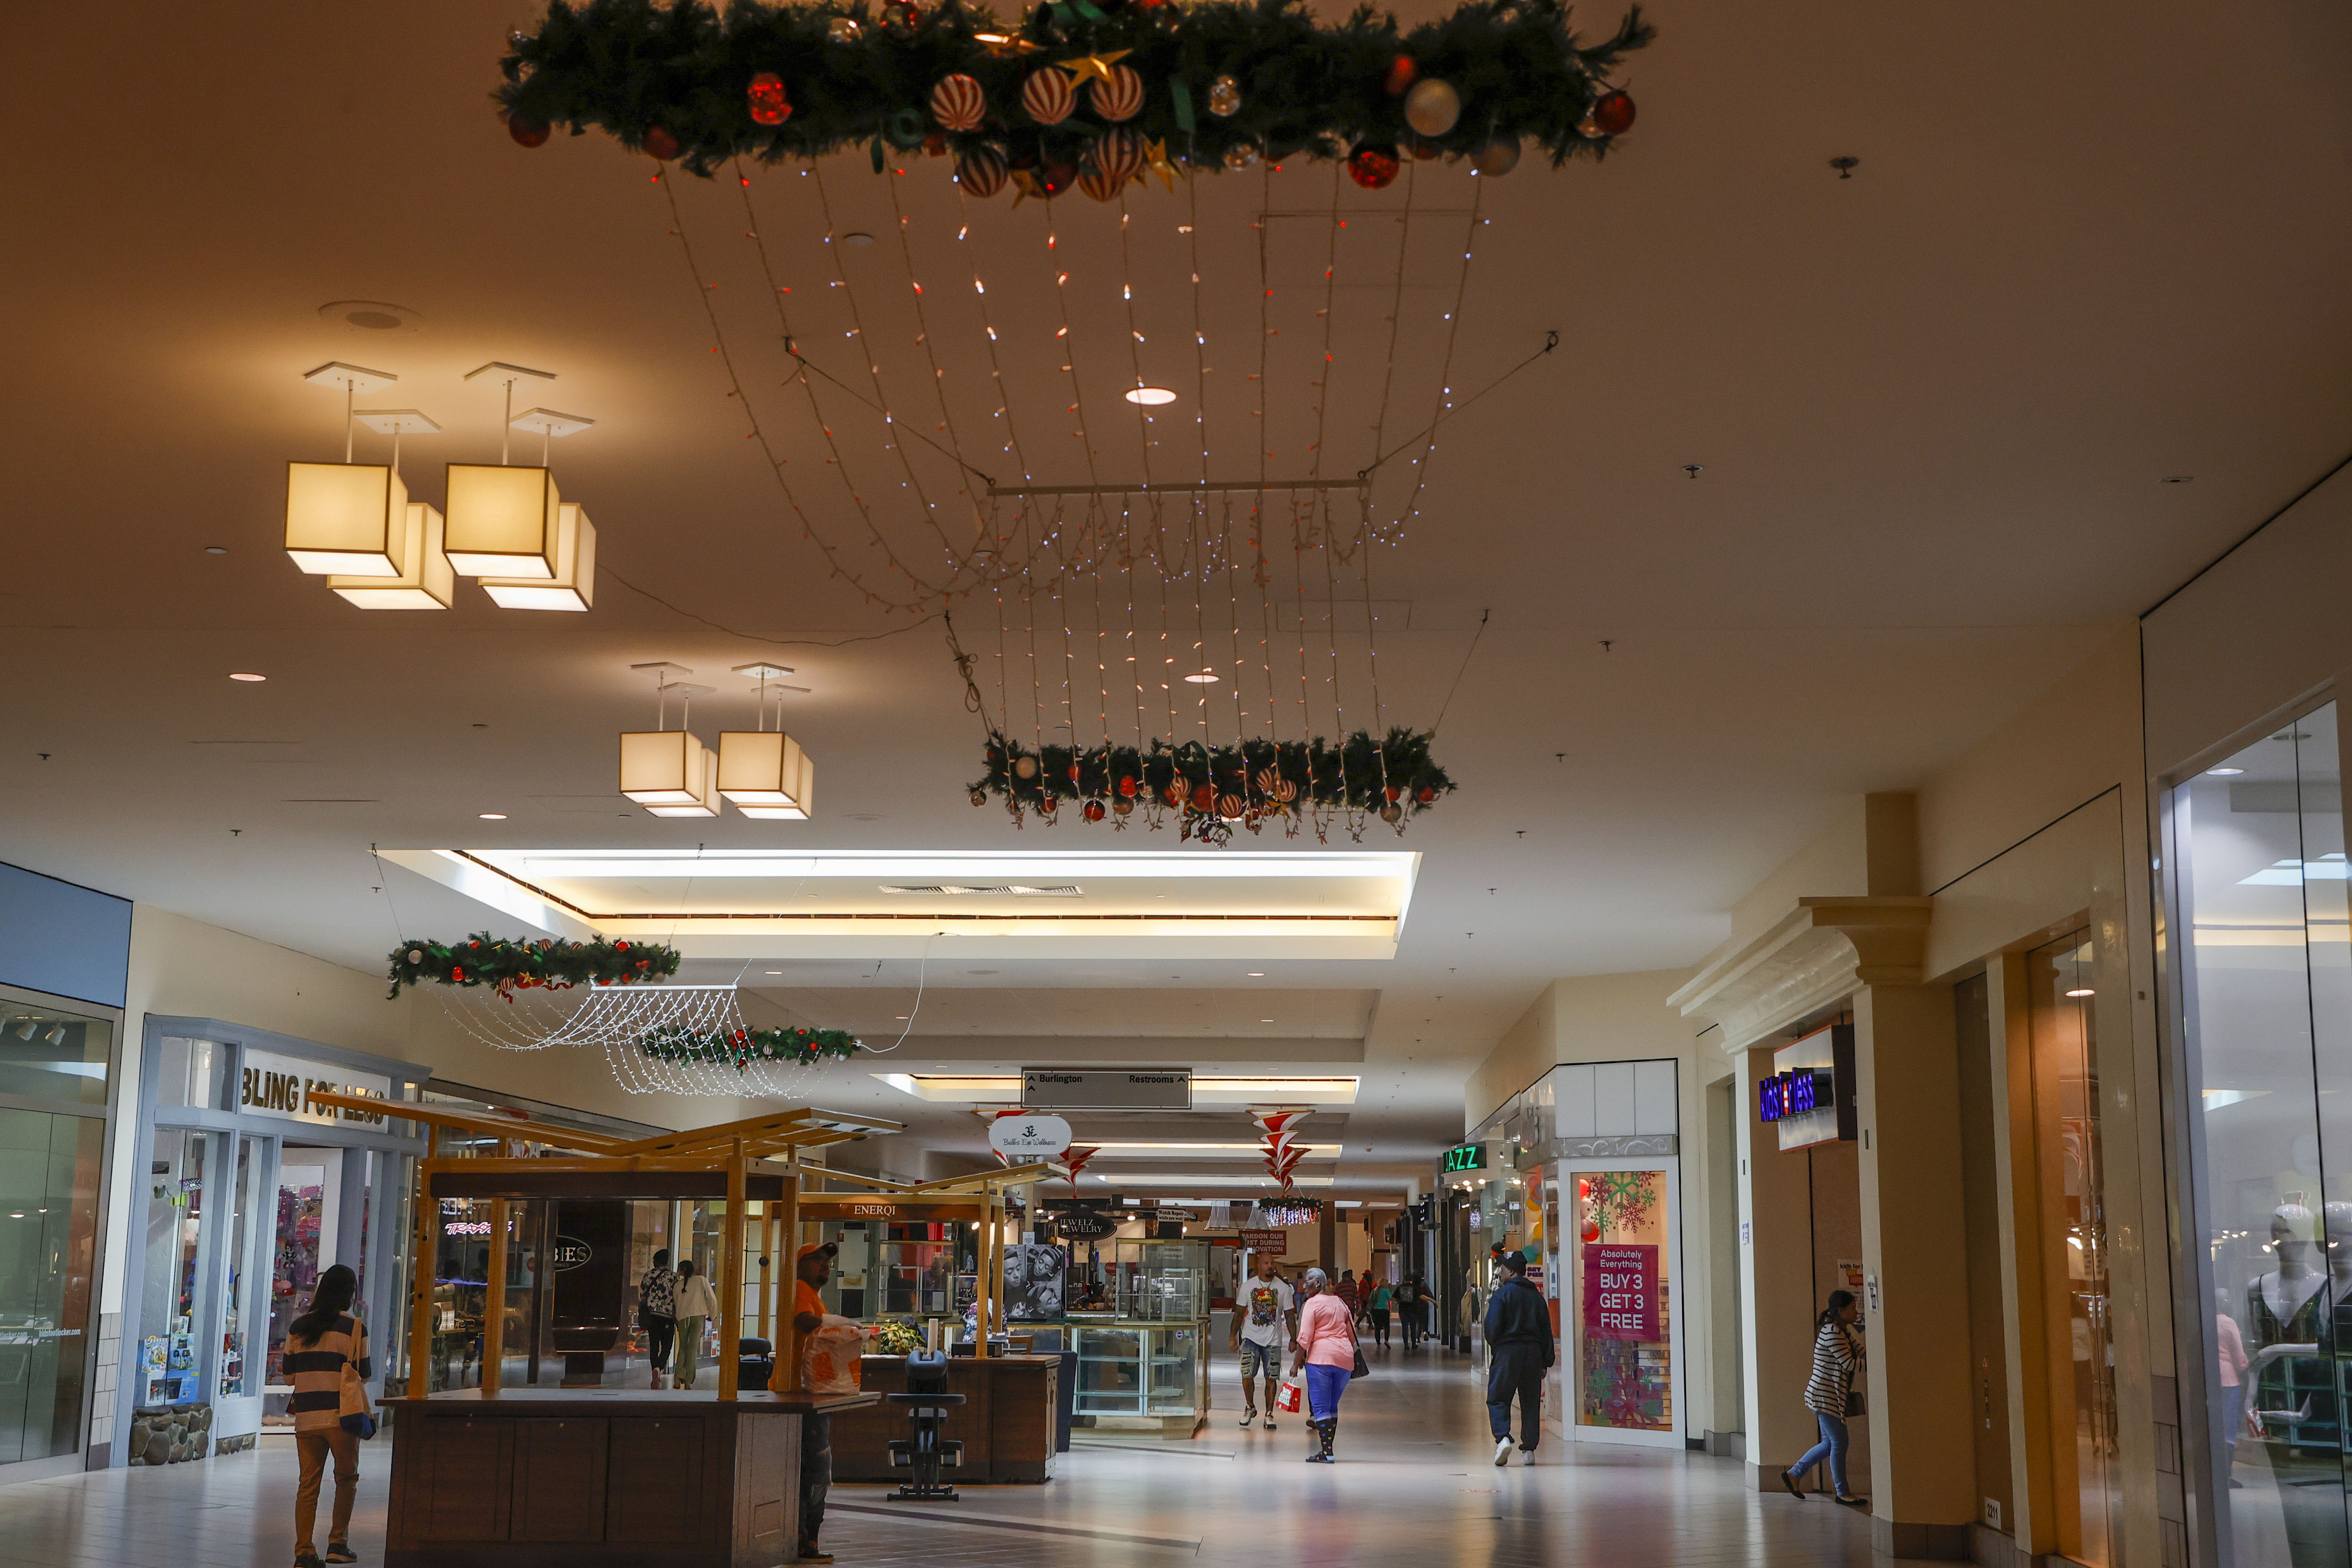 Tampa's 'dead' University Mall attracts fans nostalgic for the '90s